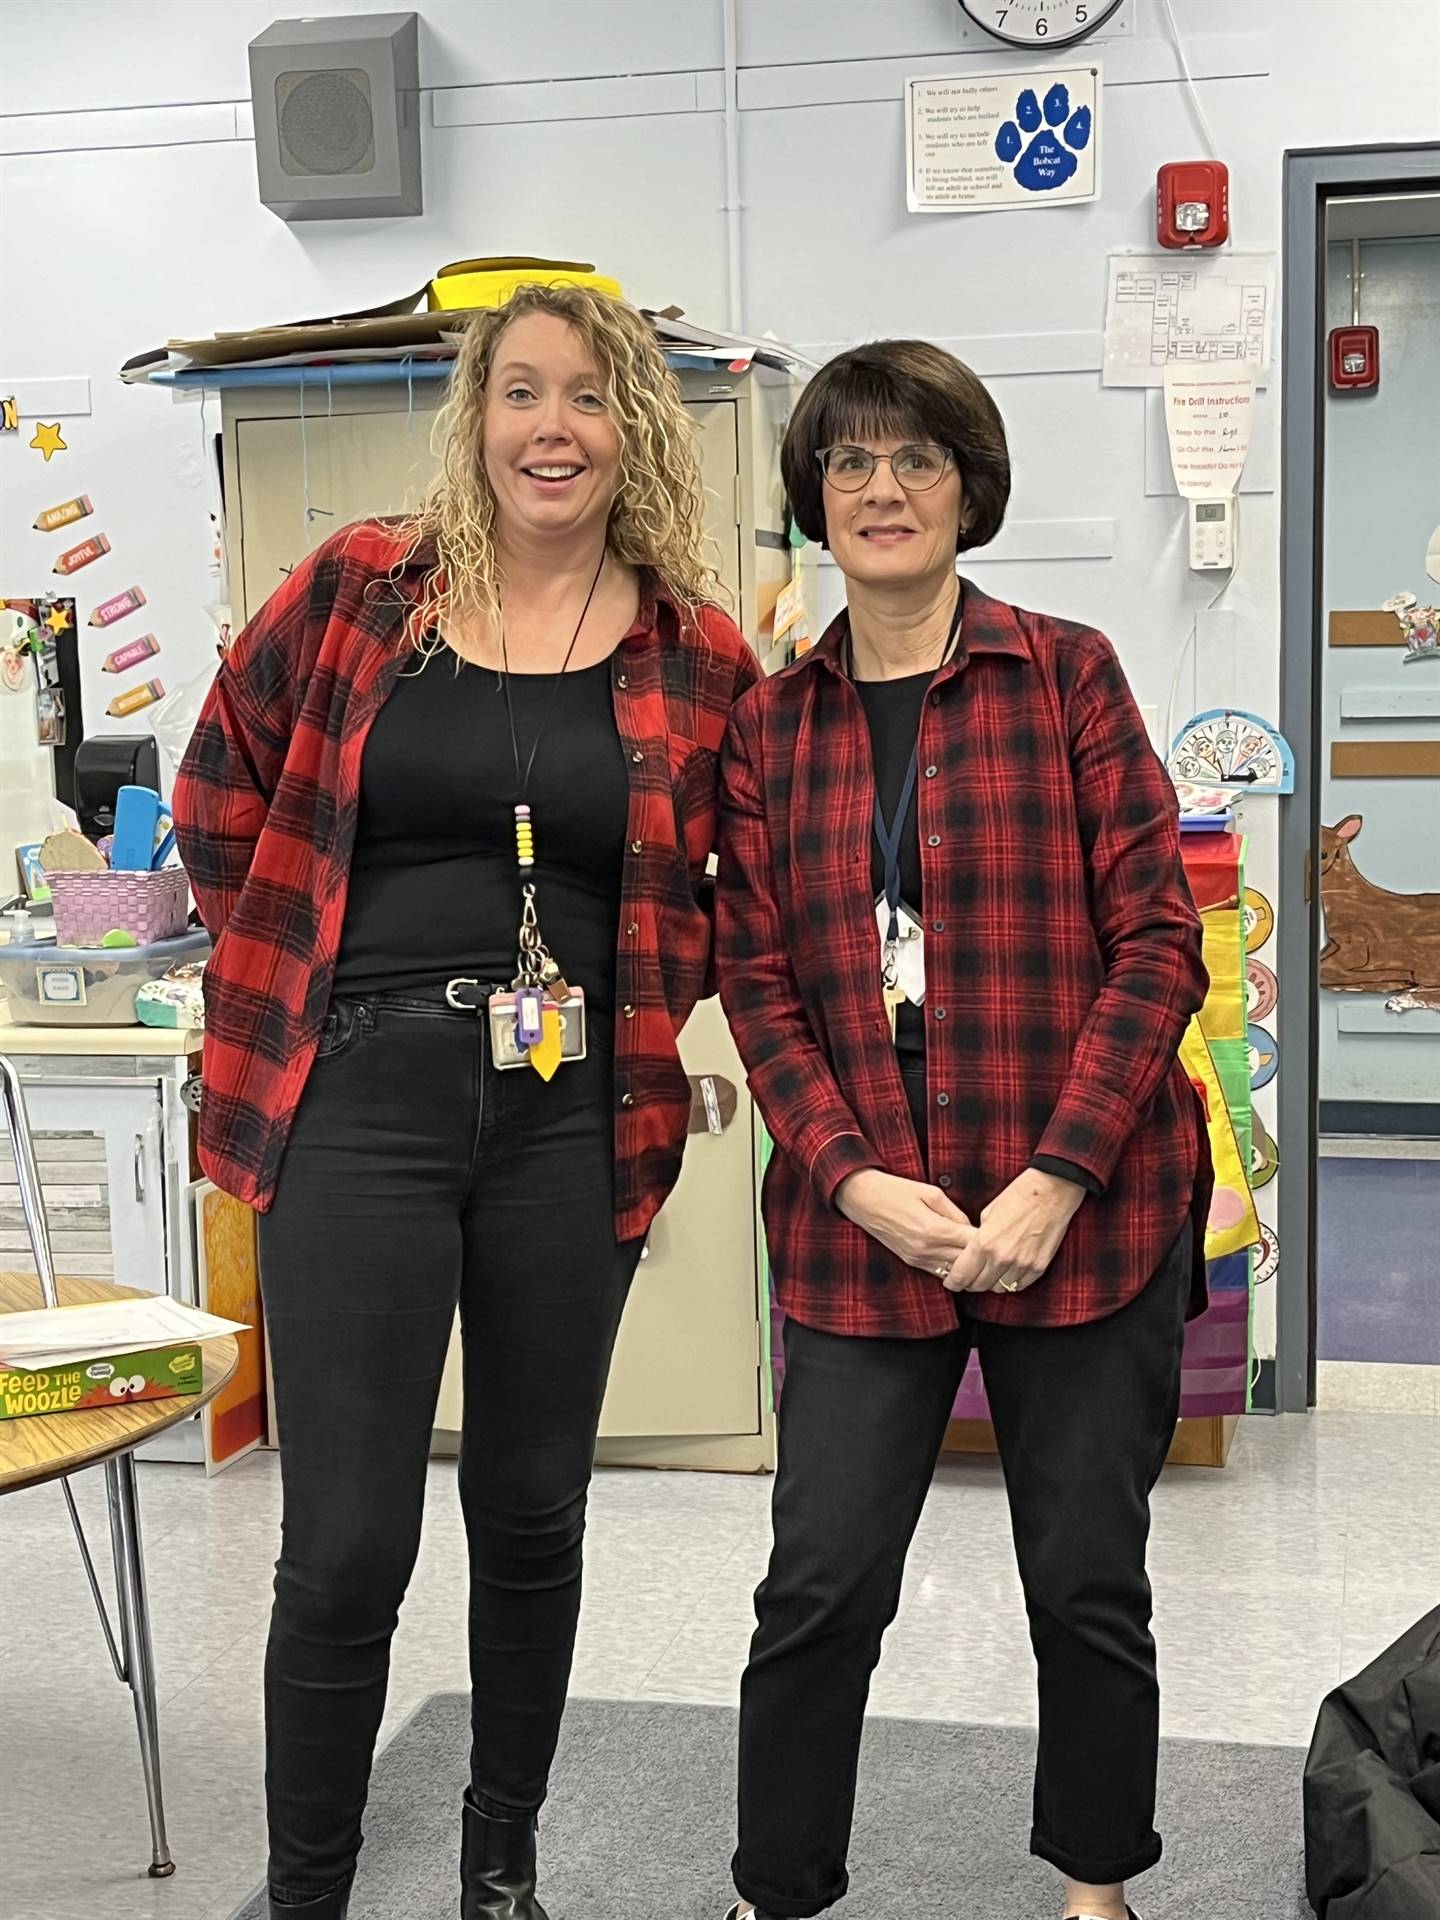 2 adults in matching black and red plaid shirts